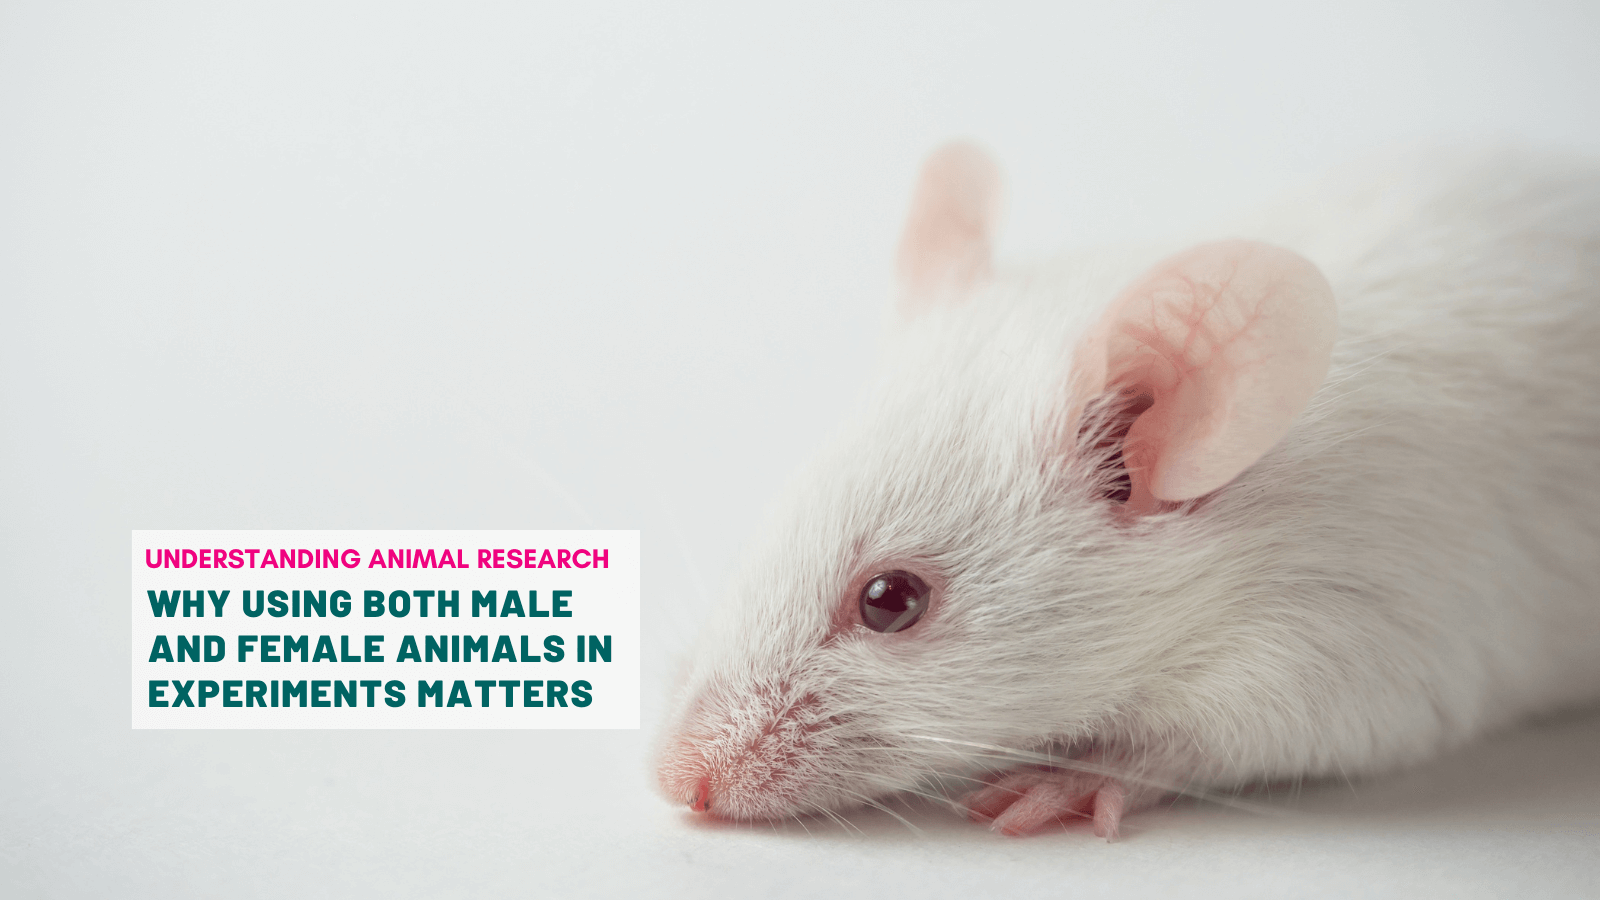 Why using both male and female animals in experiments matters